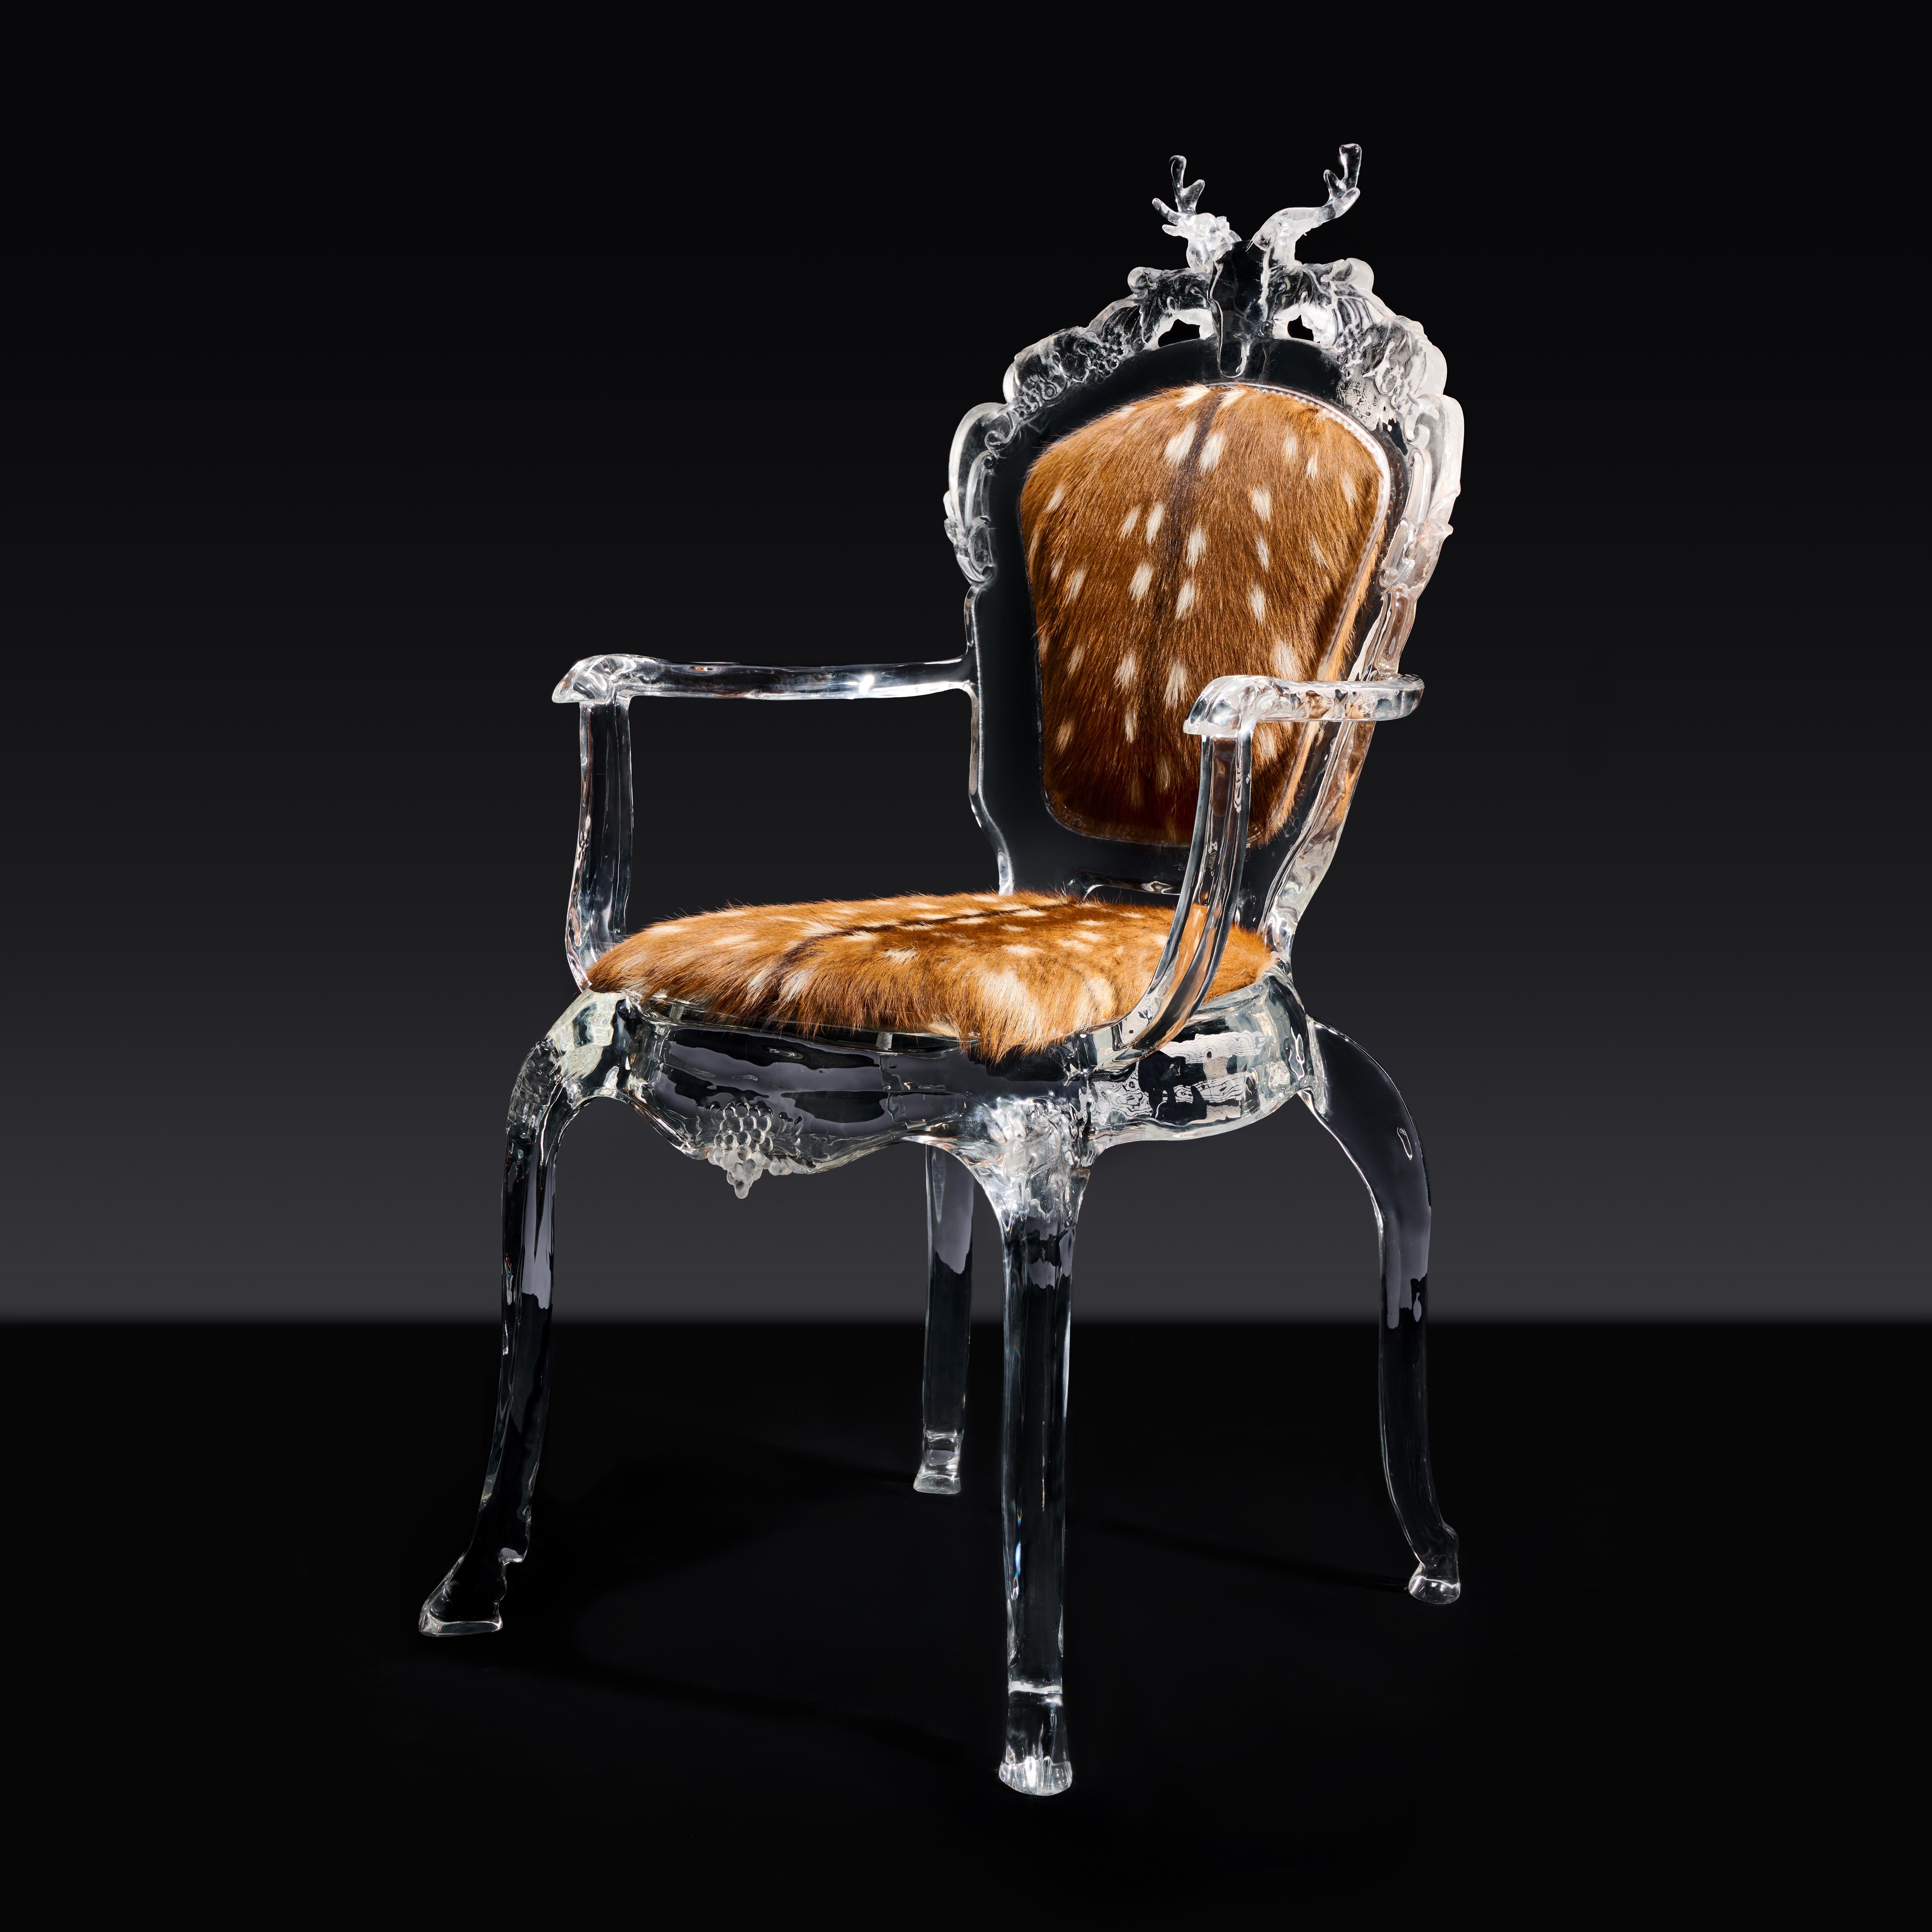 Hand-Crafted Deer Sculpture Art Chair, Rococo Style Antique Chair with Crystal by GORDON GU For Sale